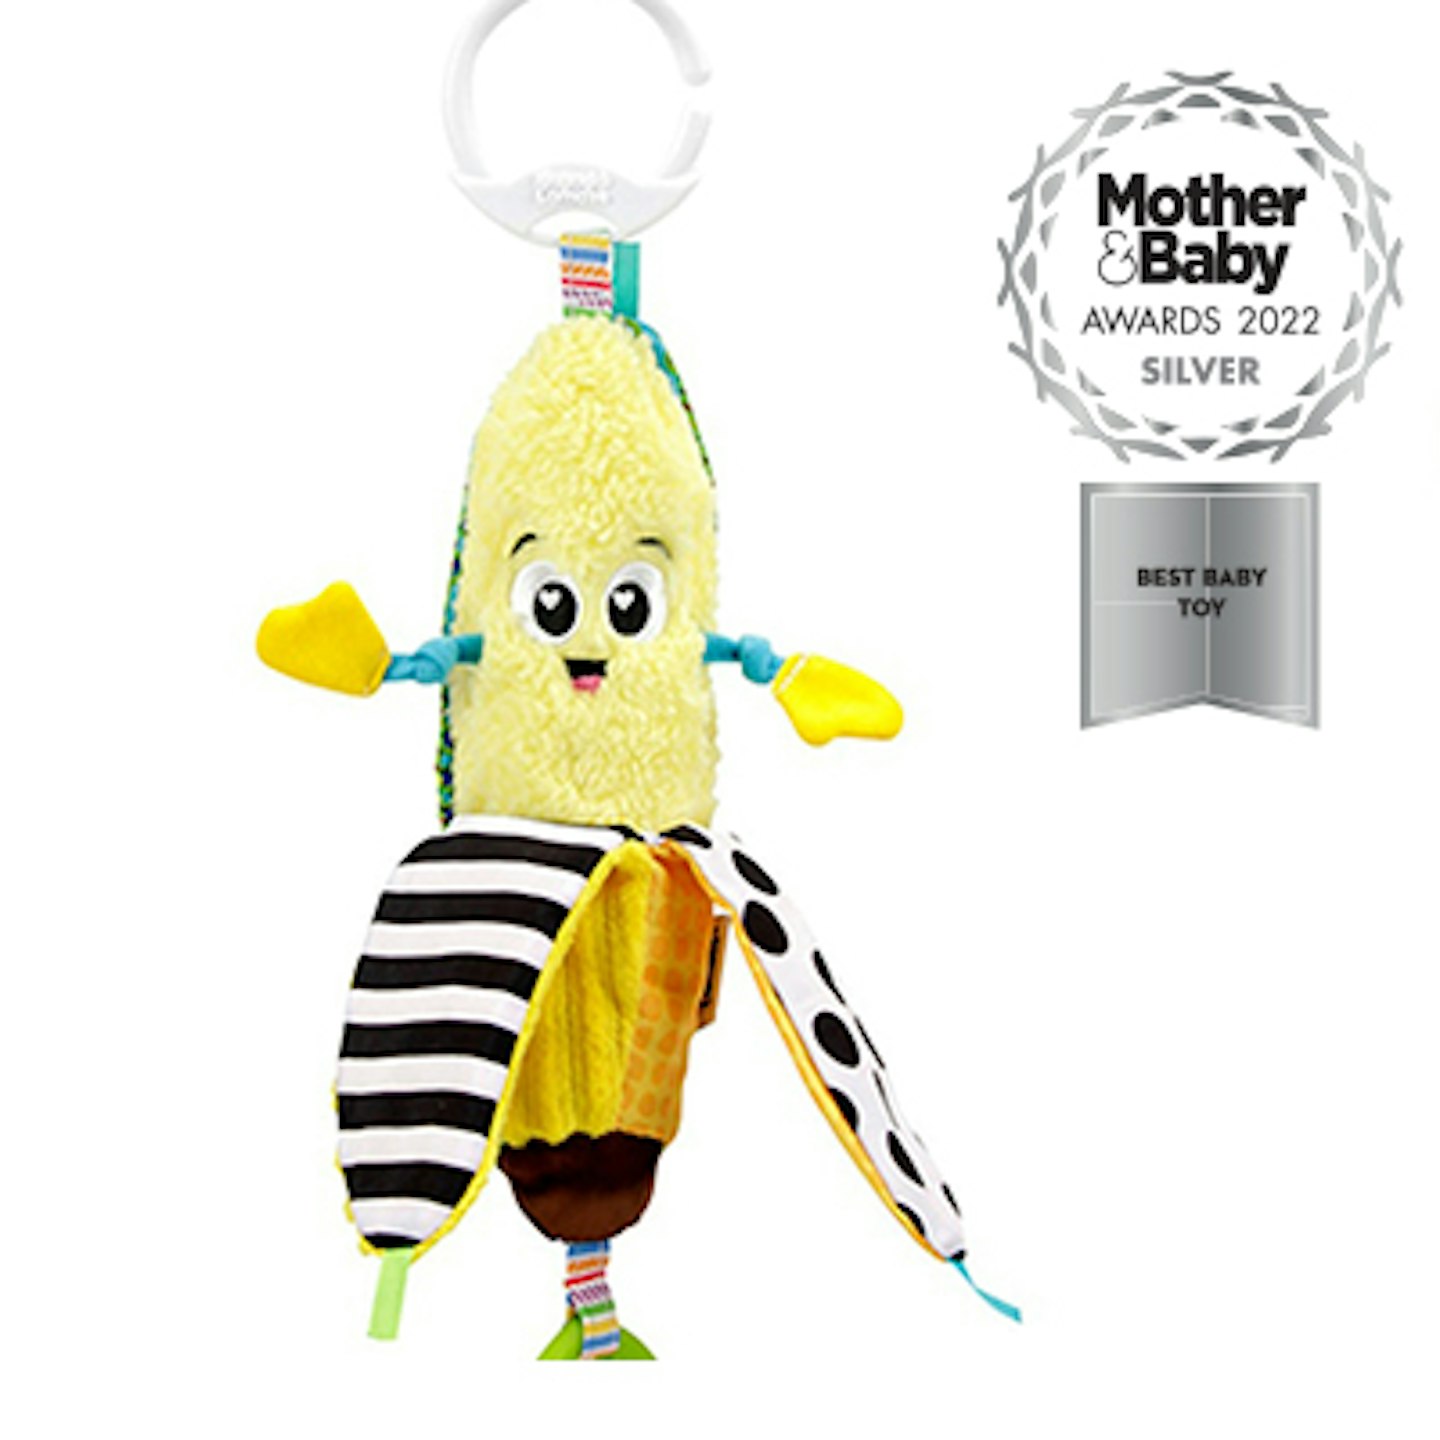 SQUARE-best-baby-toy-silver (1)